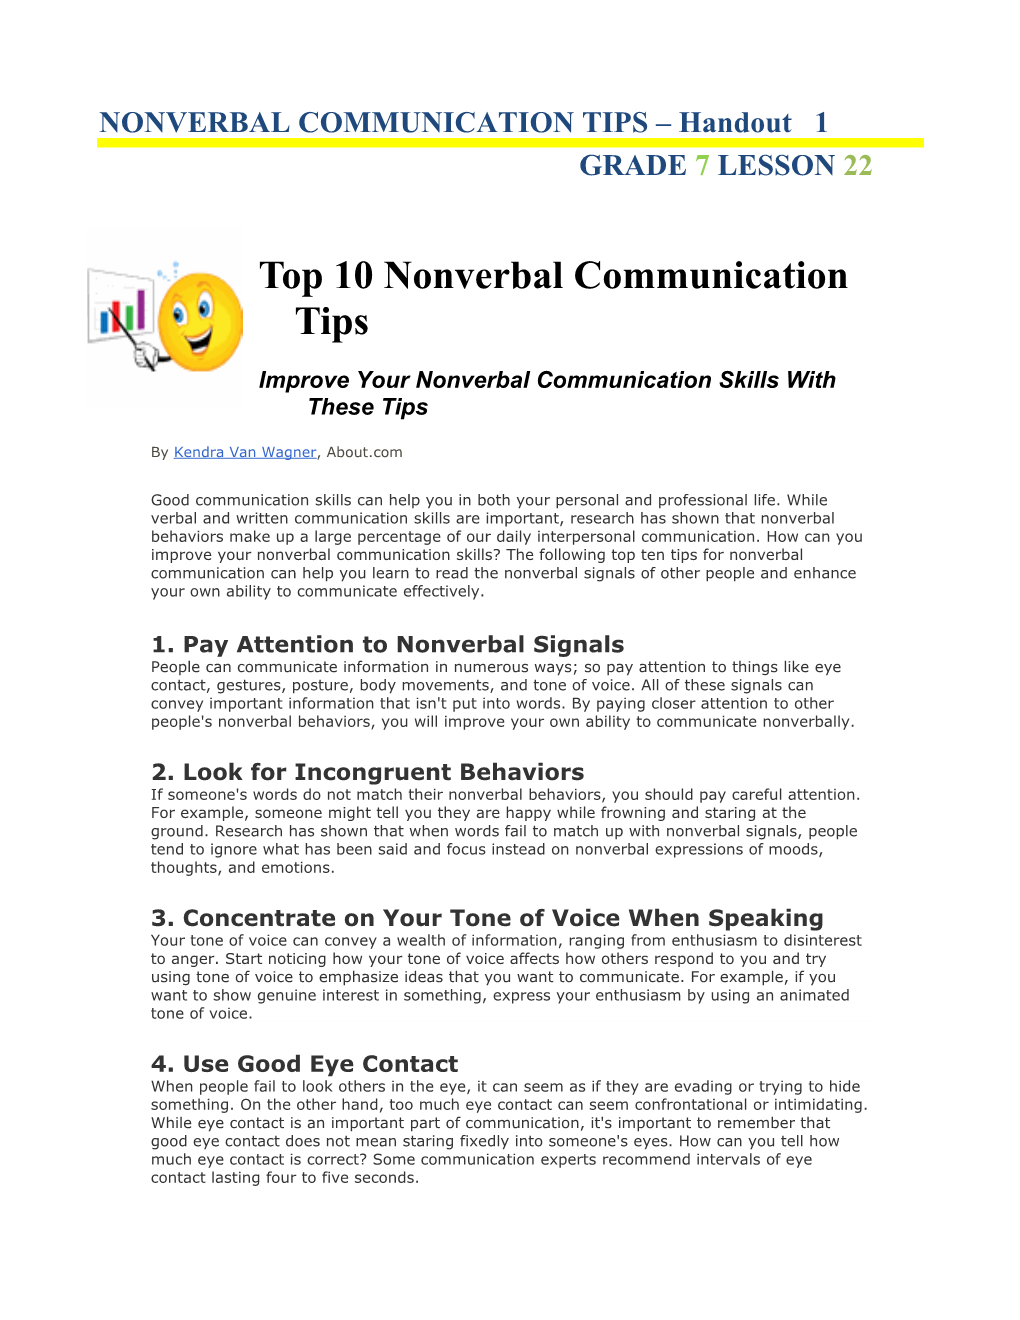 Improve Your Nonverbal Communication Skills with These Tips